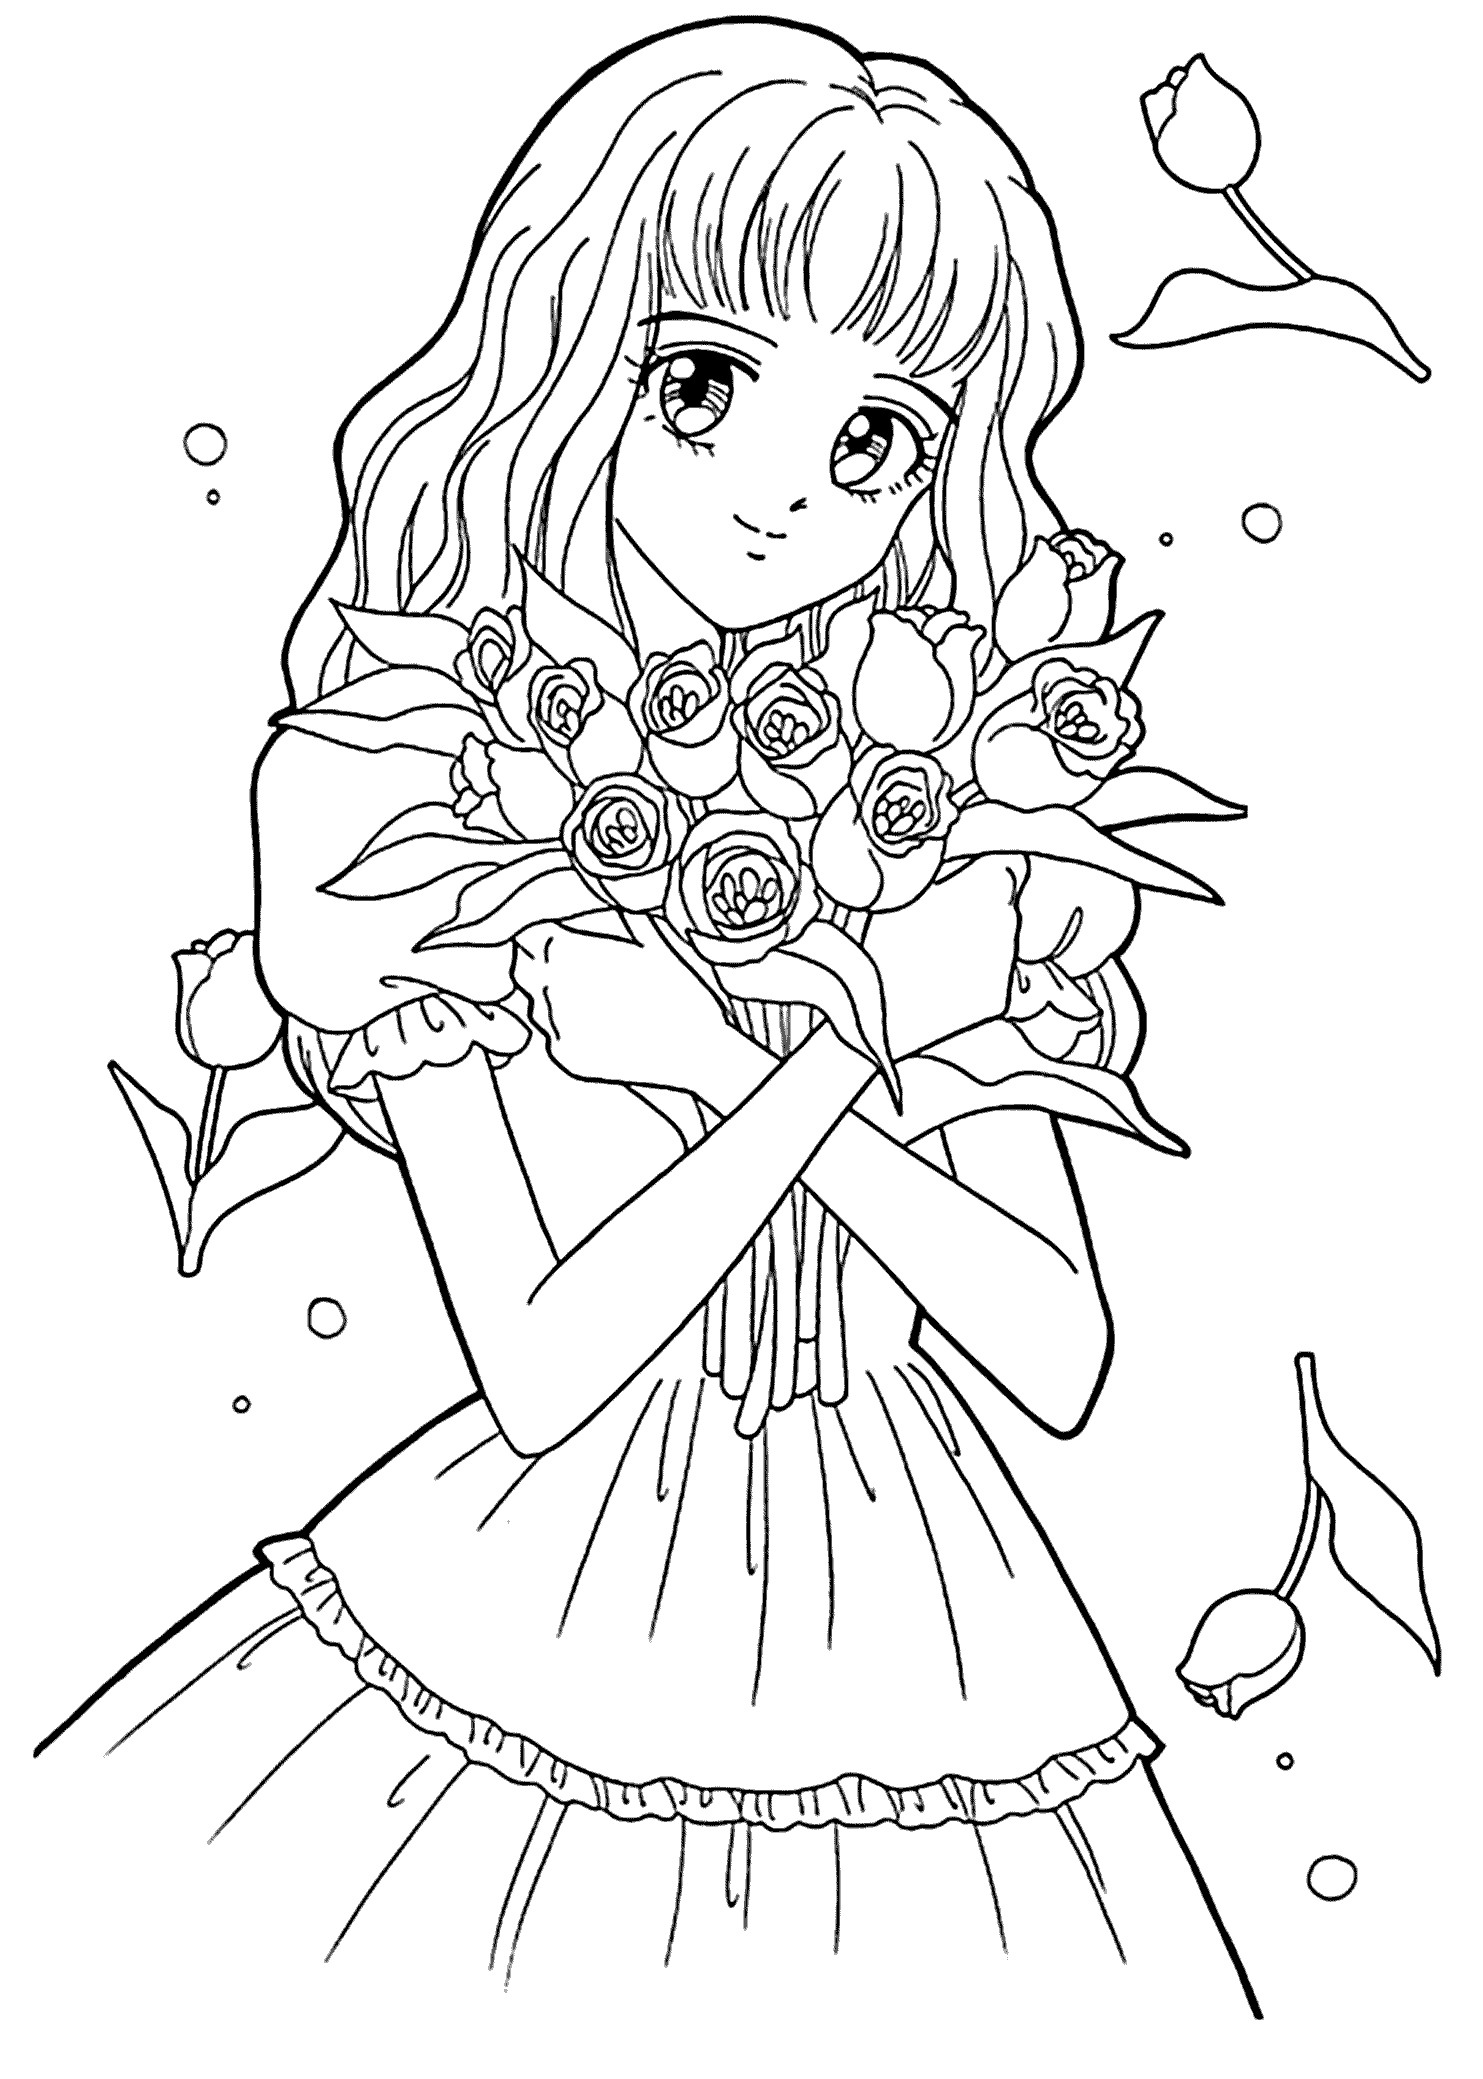 Online Printable Coloring Pages For Girls
 Best Free Printable Coloring Pages for Kids and Teens